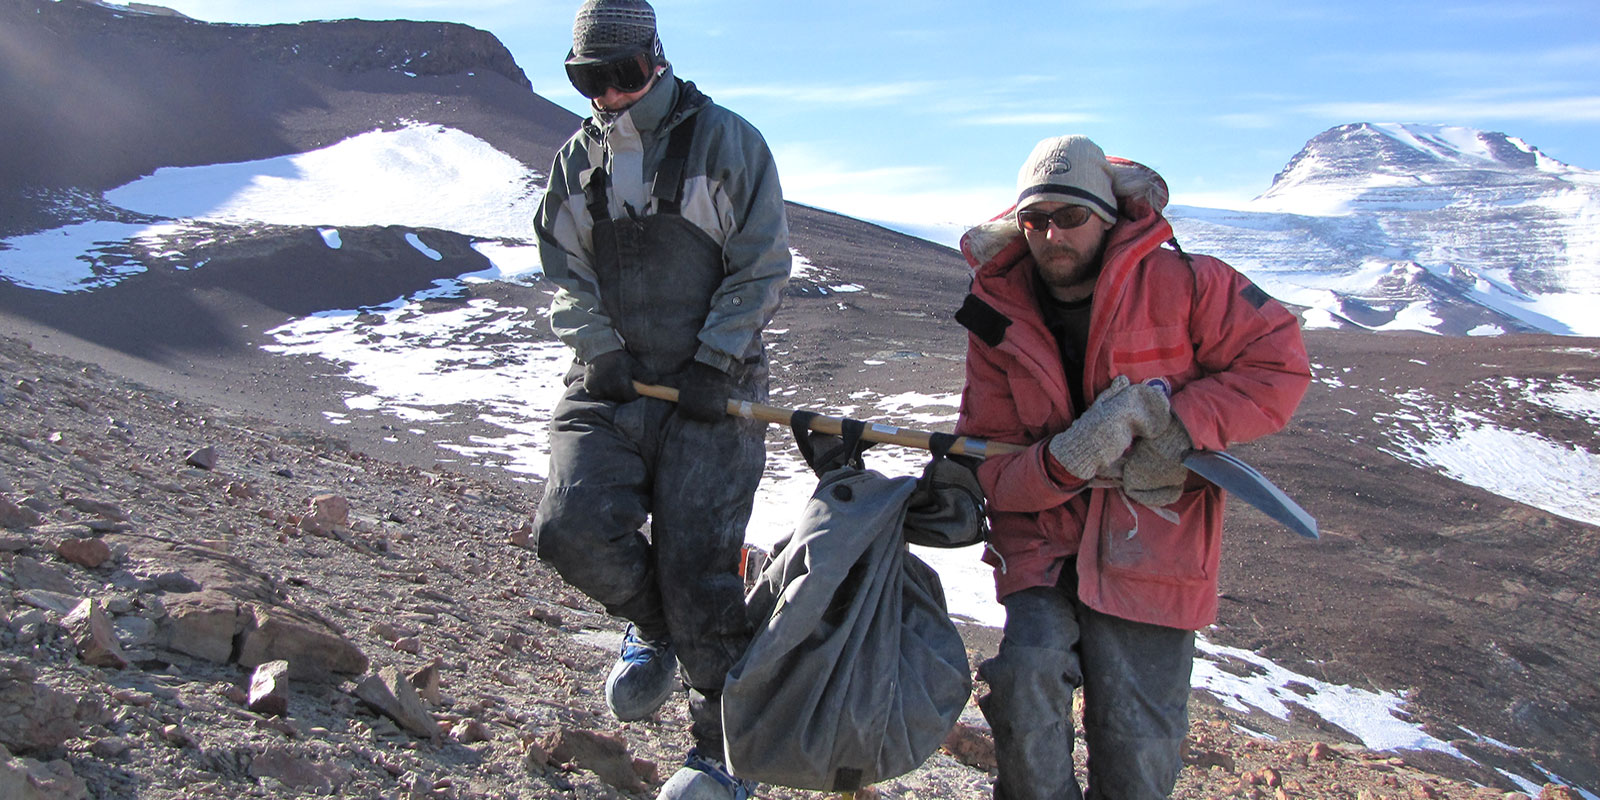 Two men use a shovel to carry a heavy fossil encased in rock out of the Antarctic landscape